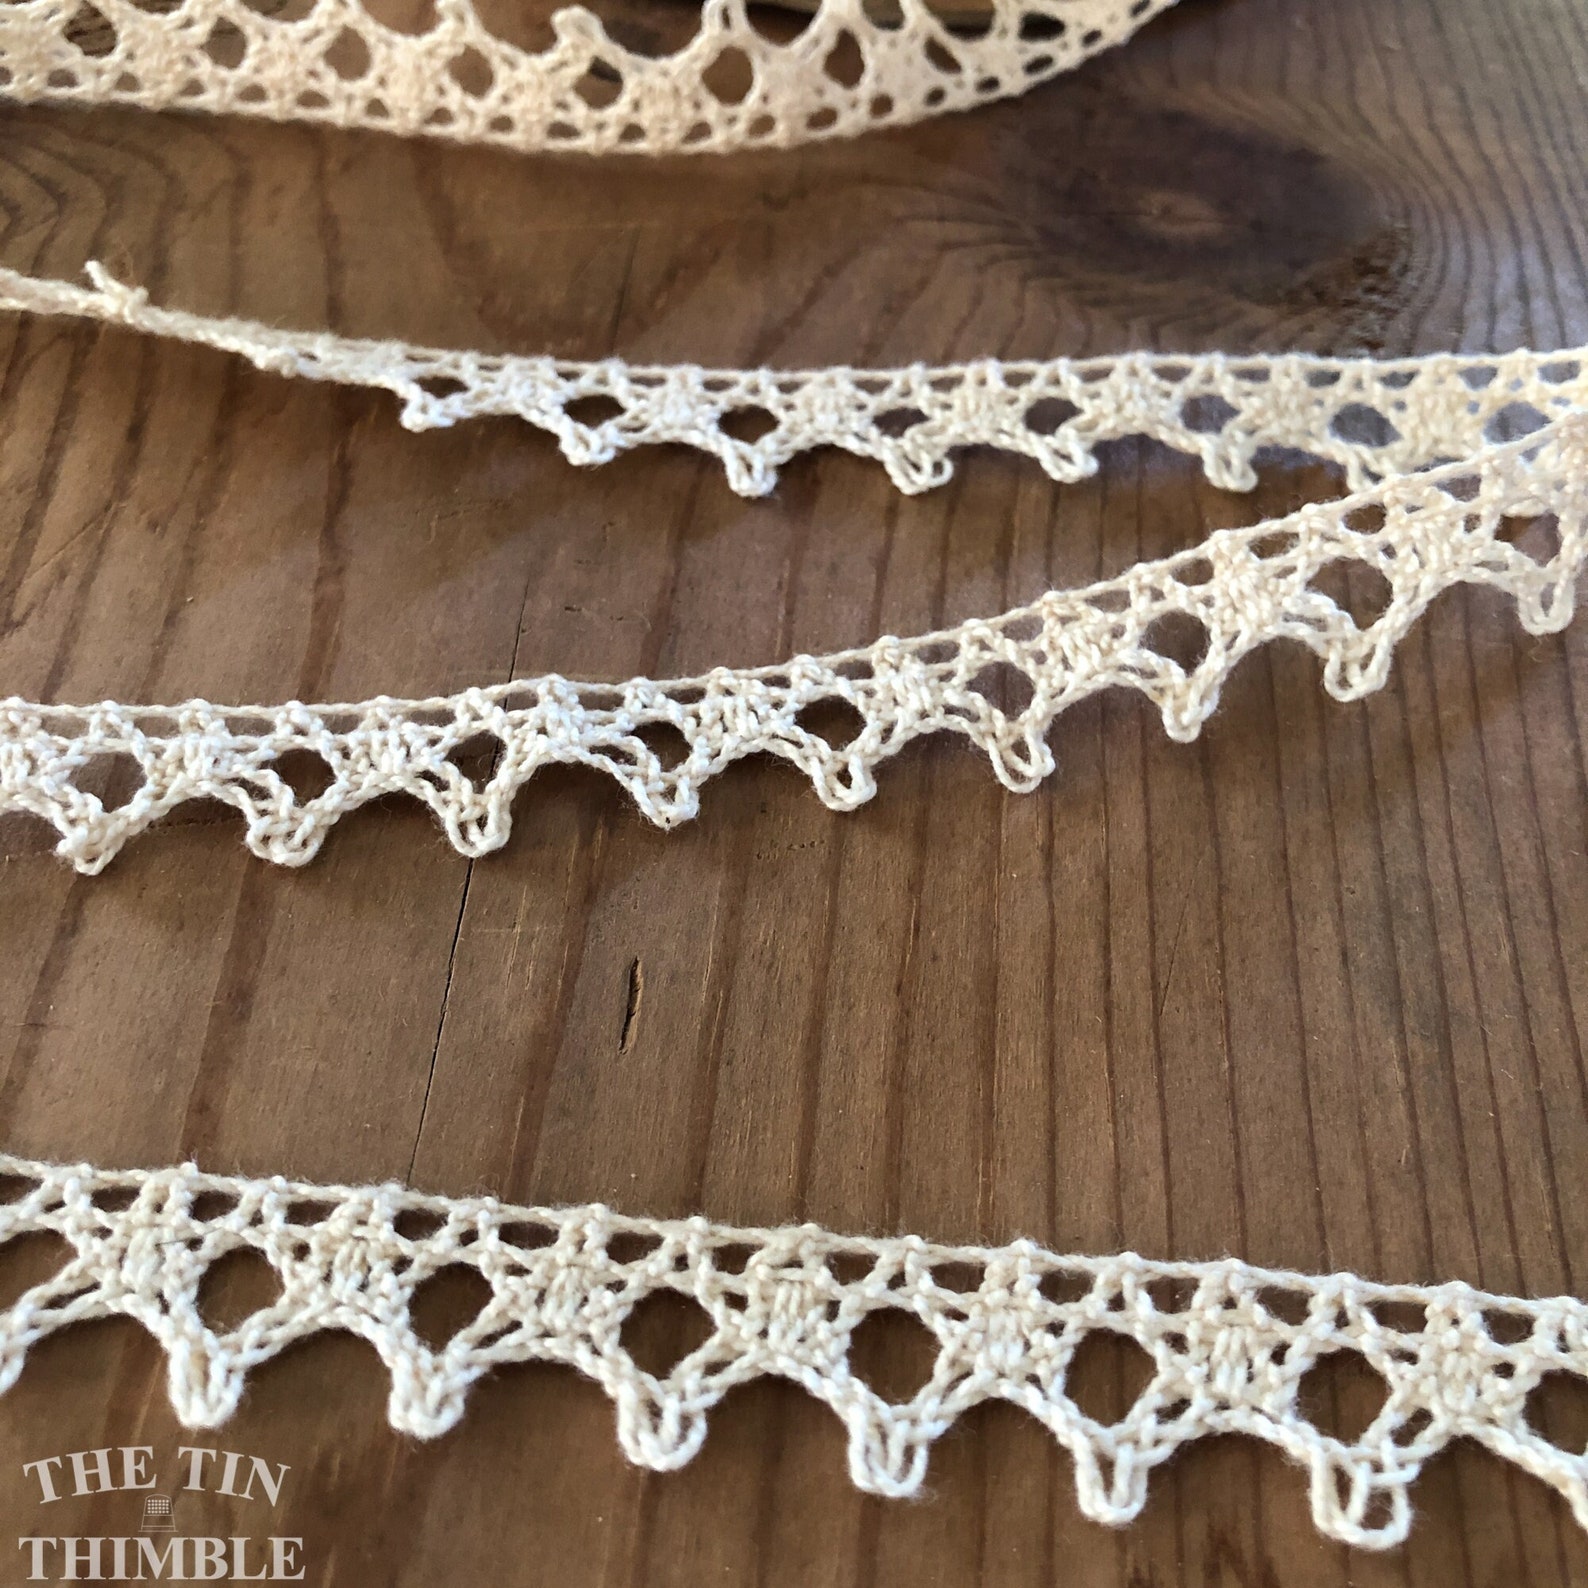 Crocheted Cotton Lace Trim By the Half Yard 1 Wide | Etsy